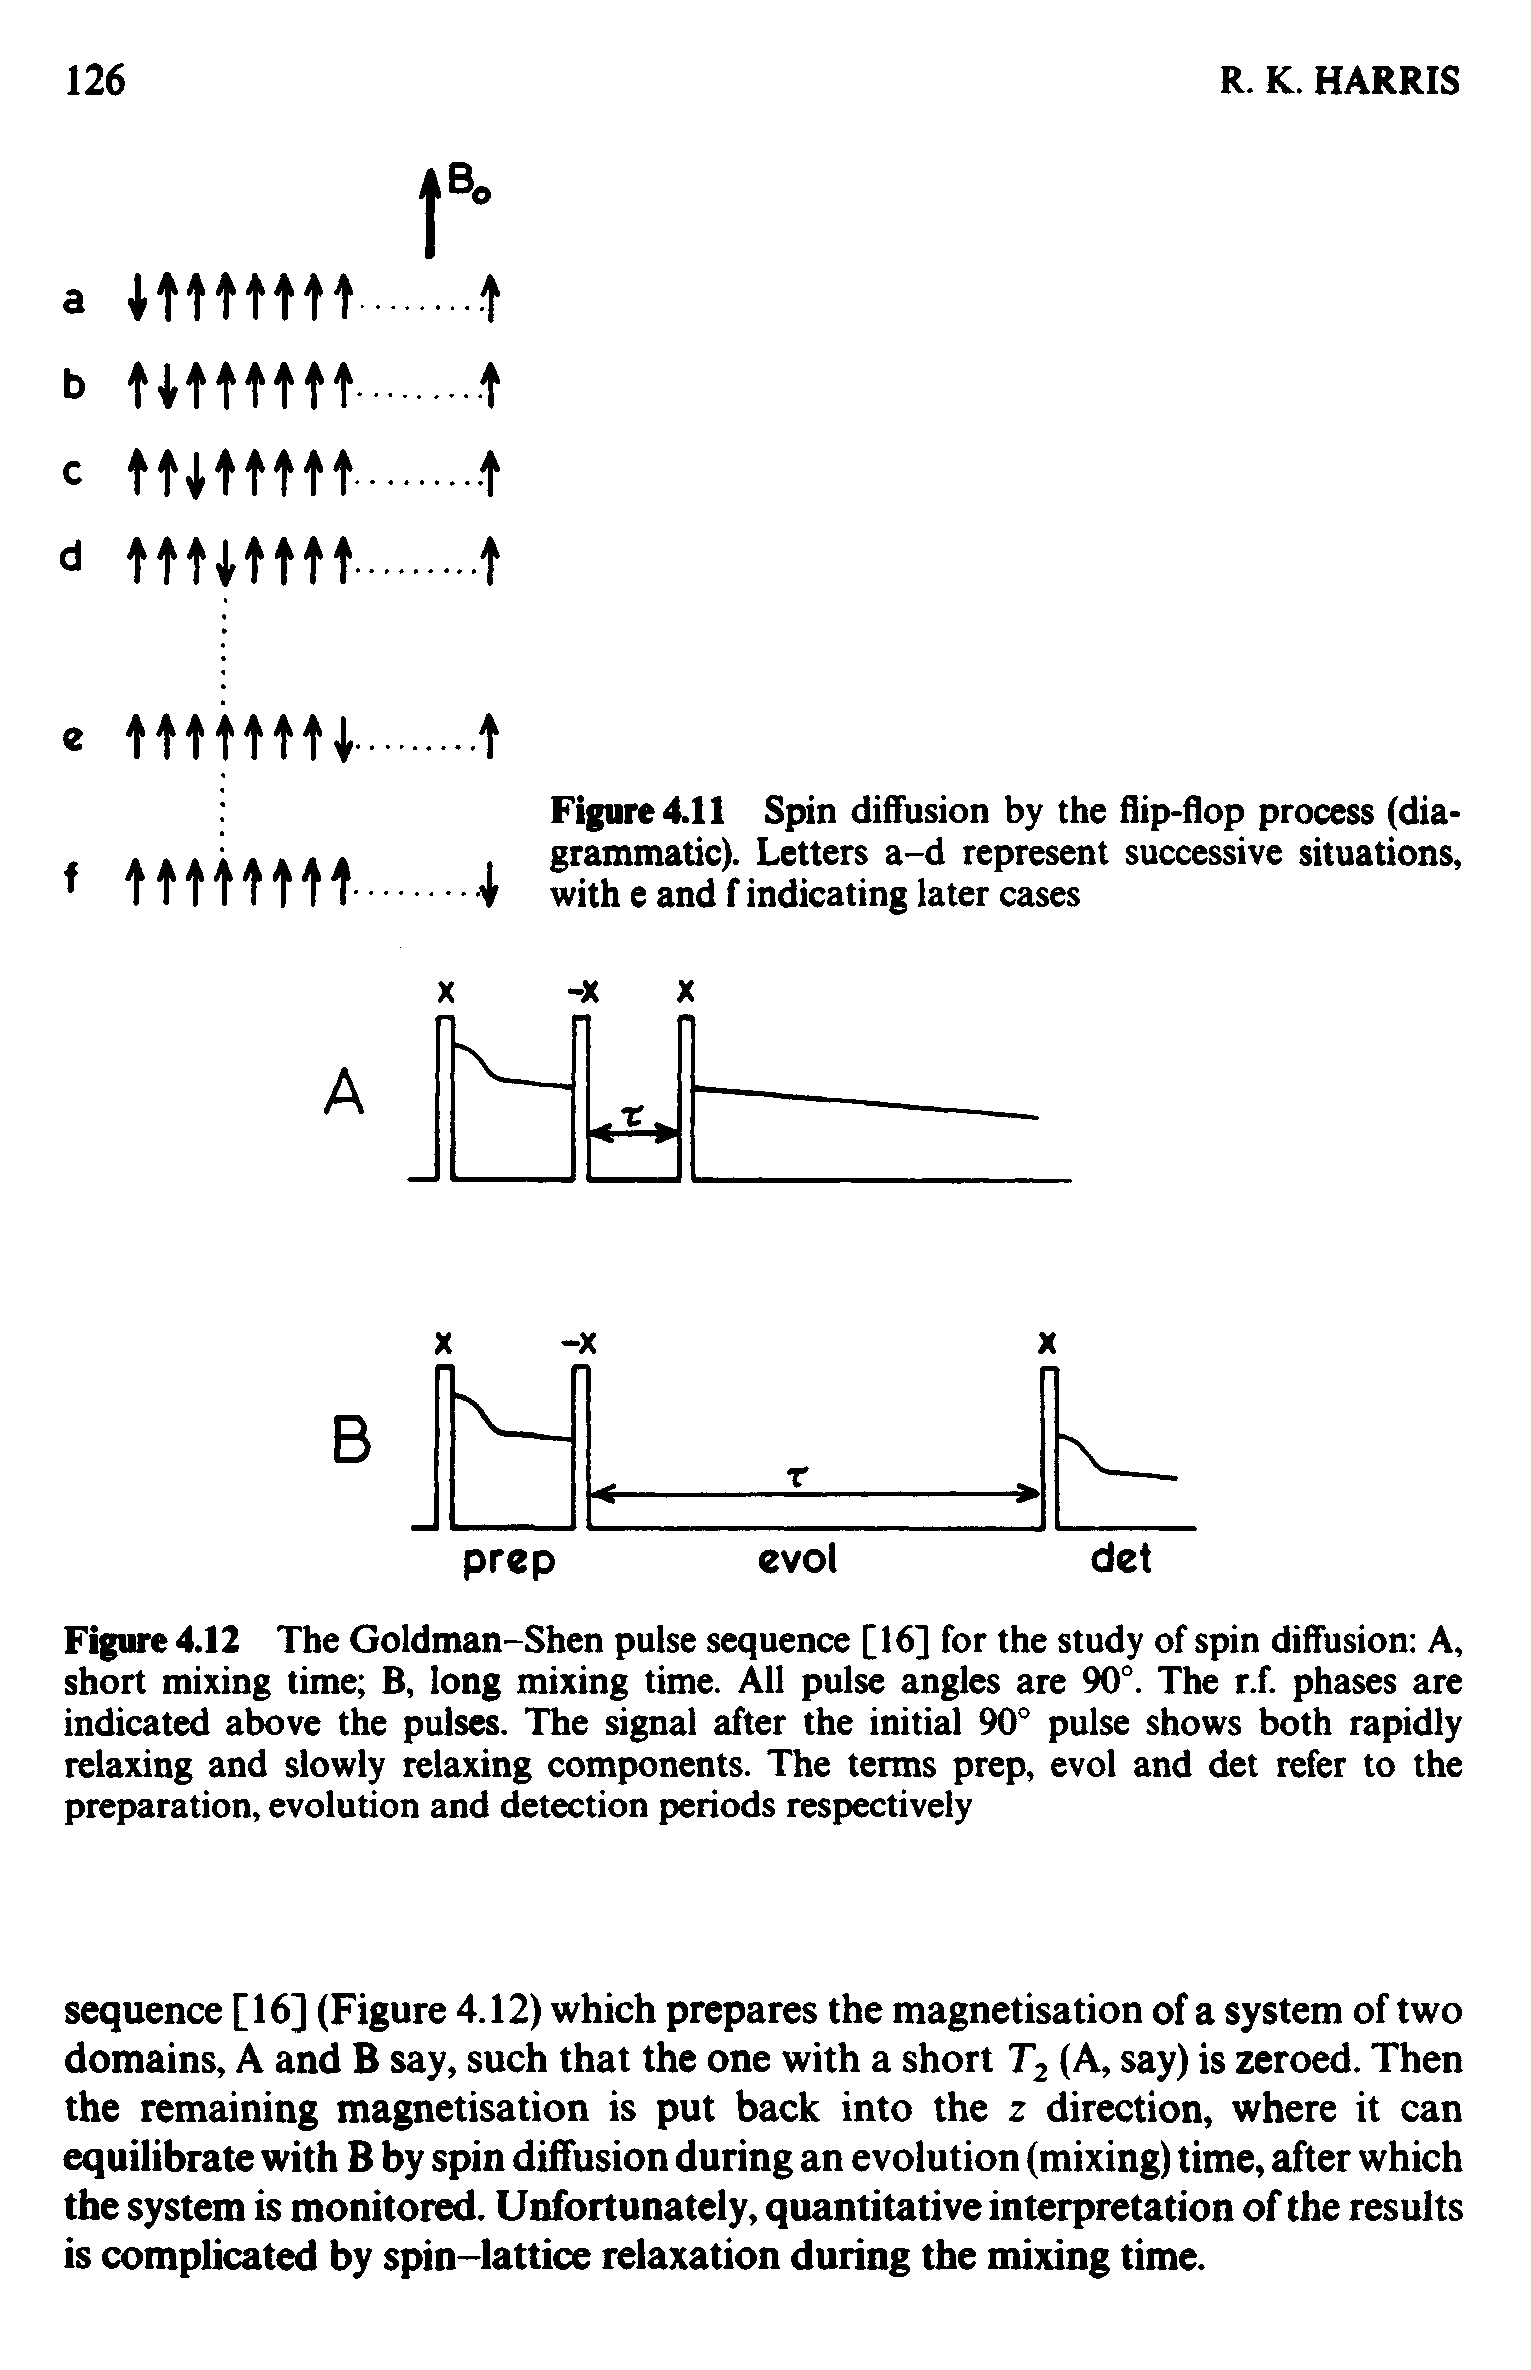 Figure 4.12 The Goldman-Shen pulse sequence [16] for the study of spin diffusion A, short mixing time B, long mixing time. All pulse angles are 90°. The r.f. phases are indicated above the pulses. The signal after the initial 90° pulse shows both rapidly relaxing and slowly relaxing components. The terms prep, evol and det refer to the preparation, evolution and detection periods respectively...